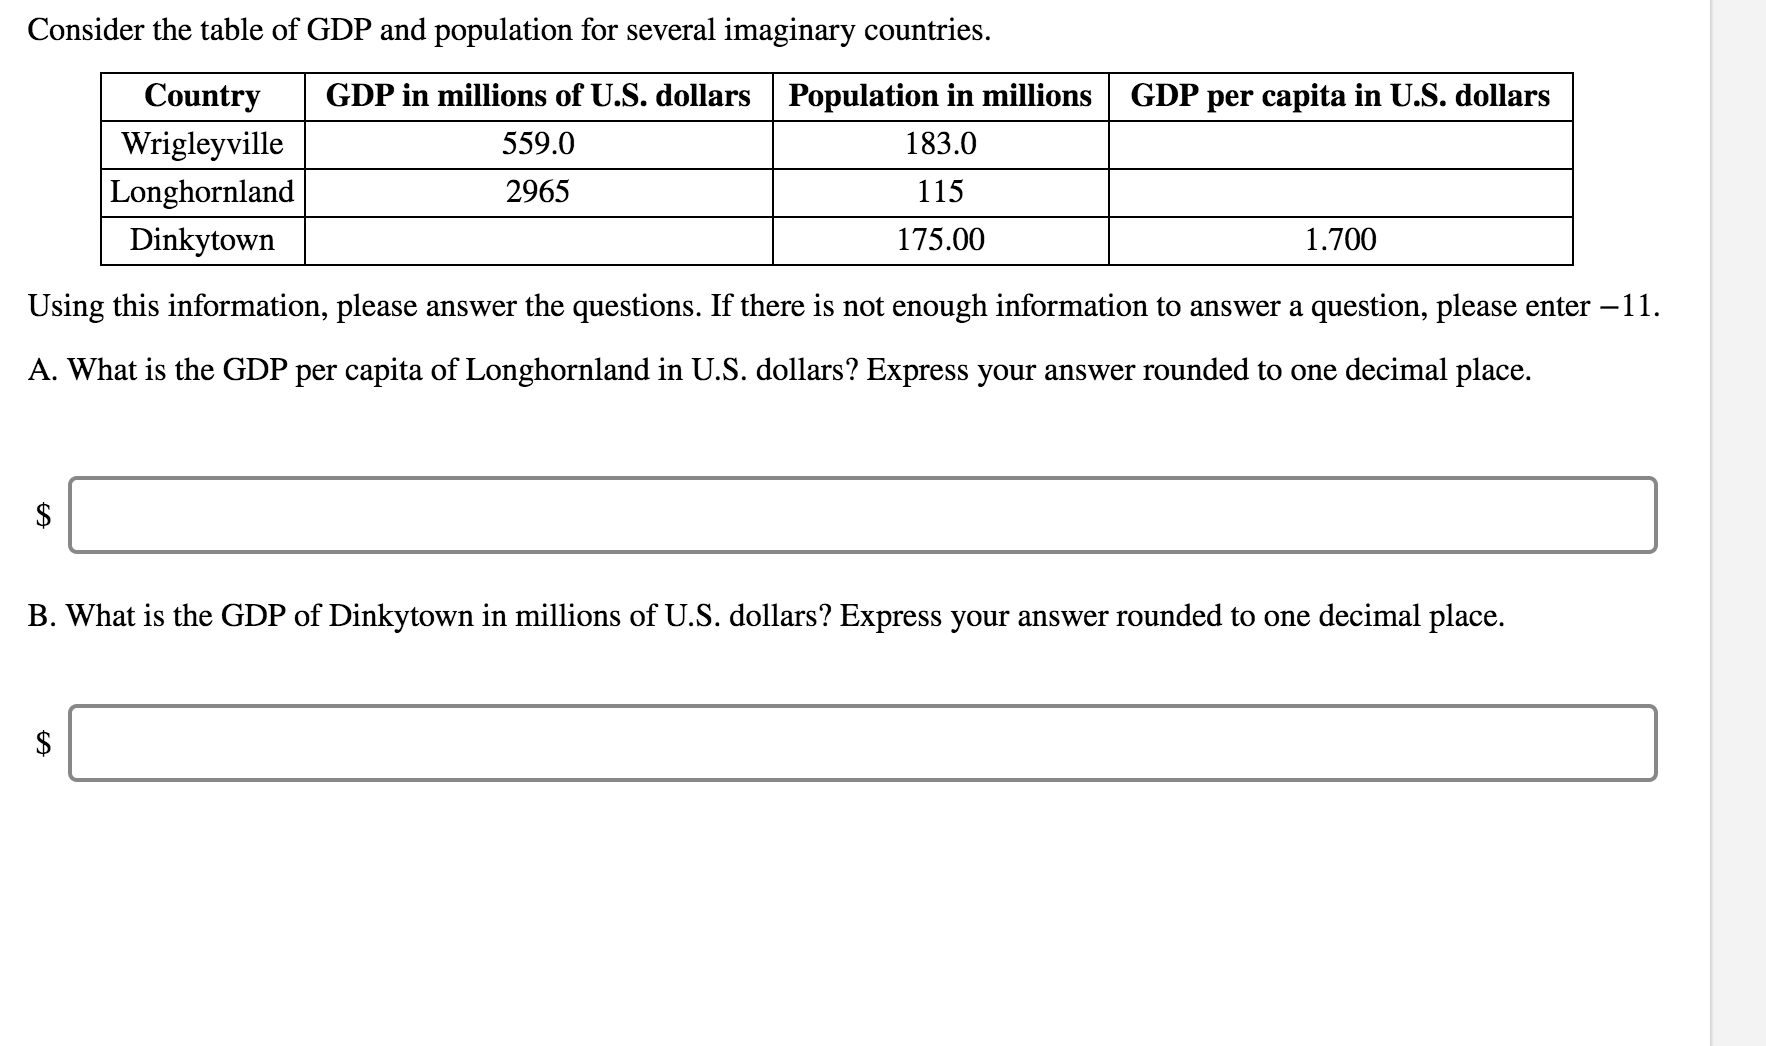 Consider the table of GDP and population for several imaginary countries.
Countrv
Wrigleyville
Longhornland
Dinkvtown
GDP in millions of U.S. dollars Population in millions GDP per capita in U.S. dollars
183.0
115
175.00
559.0
2965
1.700
Using this information, please answer the questions. If there is not enough information to answer a question, please enter -11
A. What is the GDP per capita of Longhornland in Ủ.S. dollars? Express your answer rounded to one decimal place.
B. What is the GDP of Dinkytown in millions of Ủ.Š. dollars? Express your answer rounded to one decimal place.
